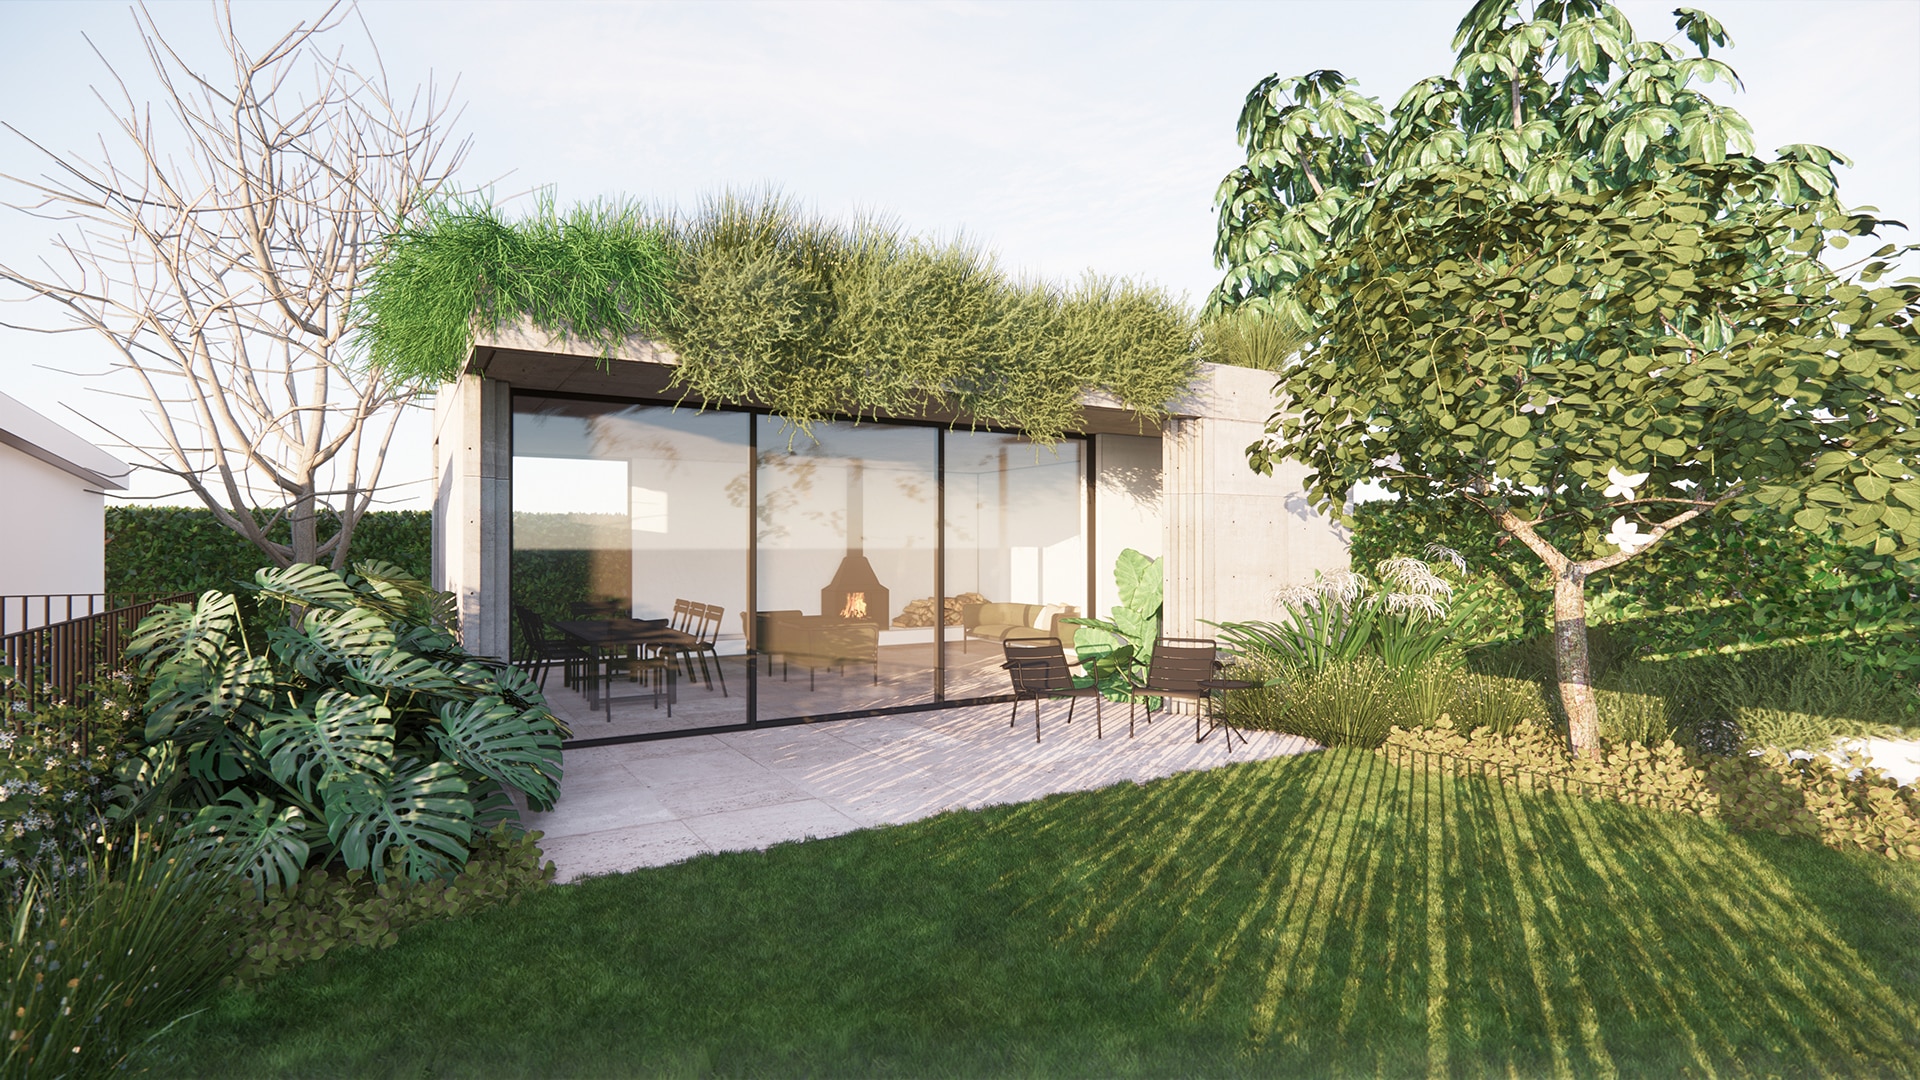 landscape design render of an outdoor room structure with green roof